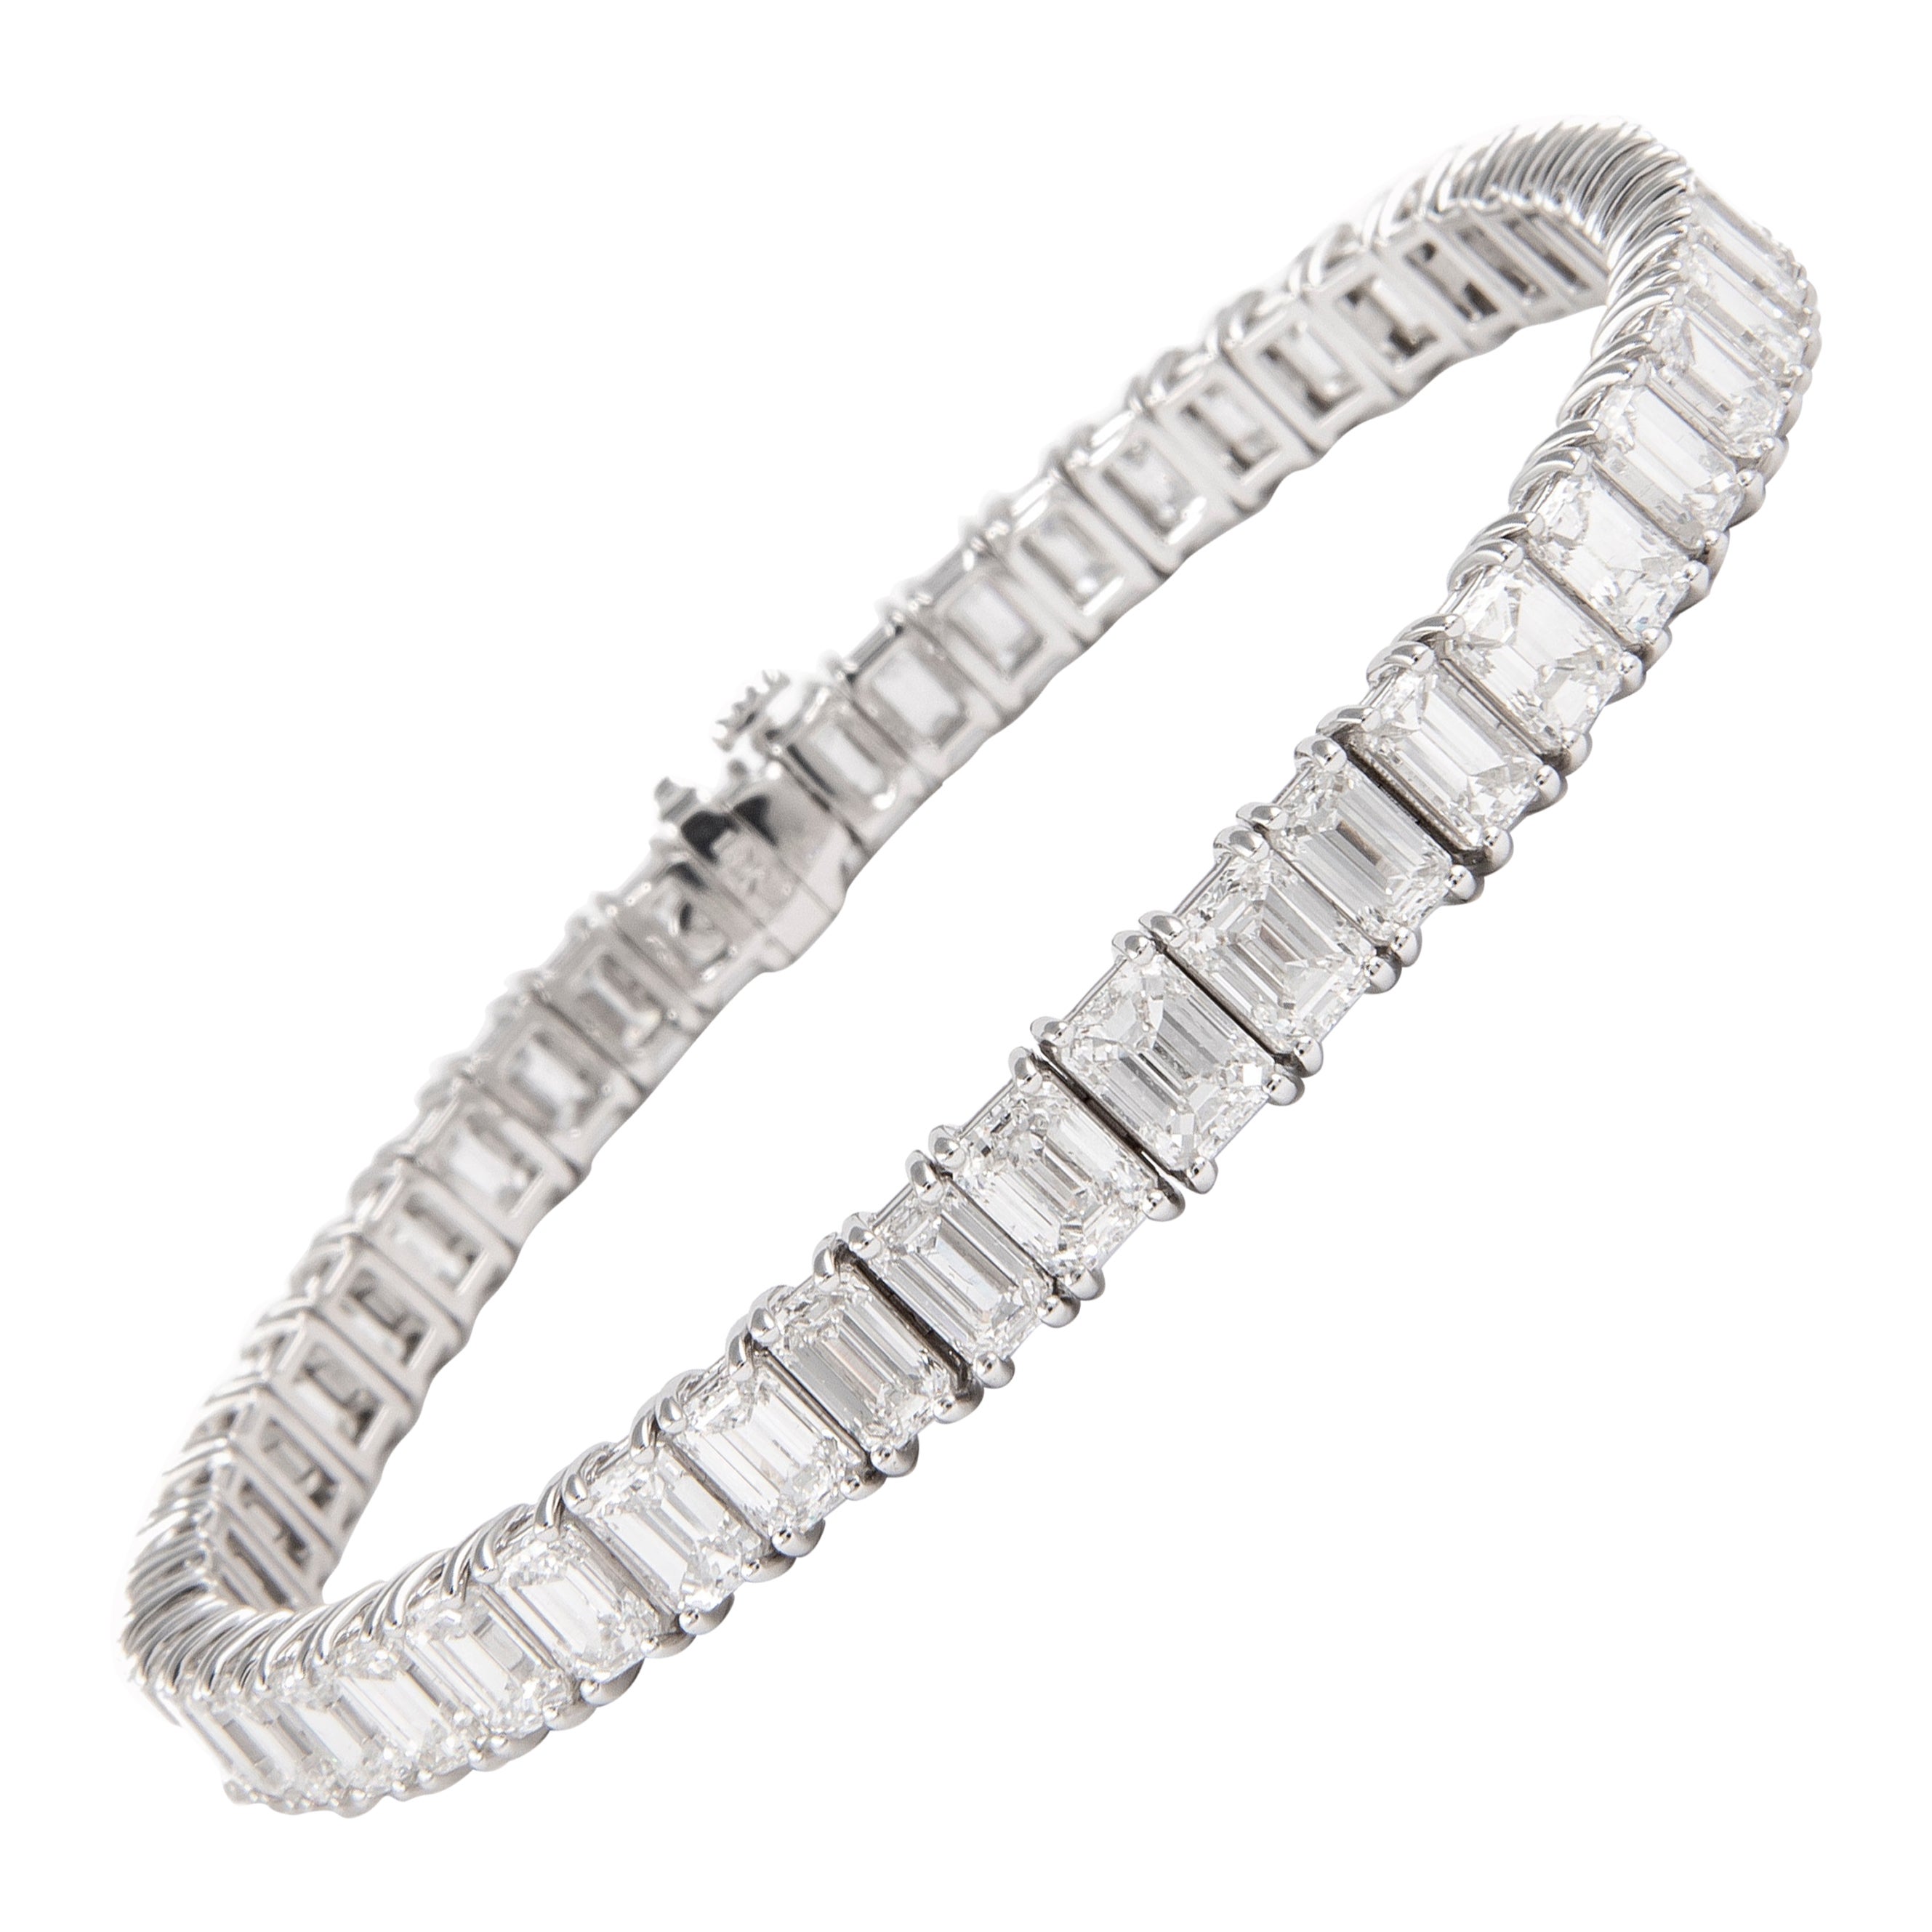 Louis Vuitton White Gold And Diamond Convertible Necklace Bracelet  Available For Immediate Sale At Sotheby's